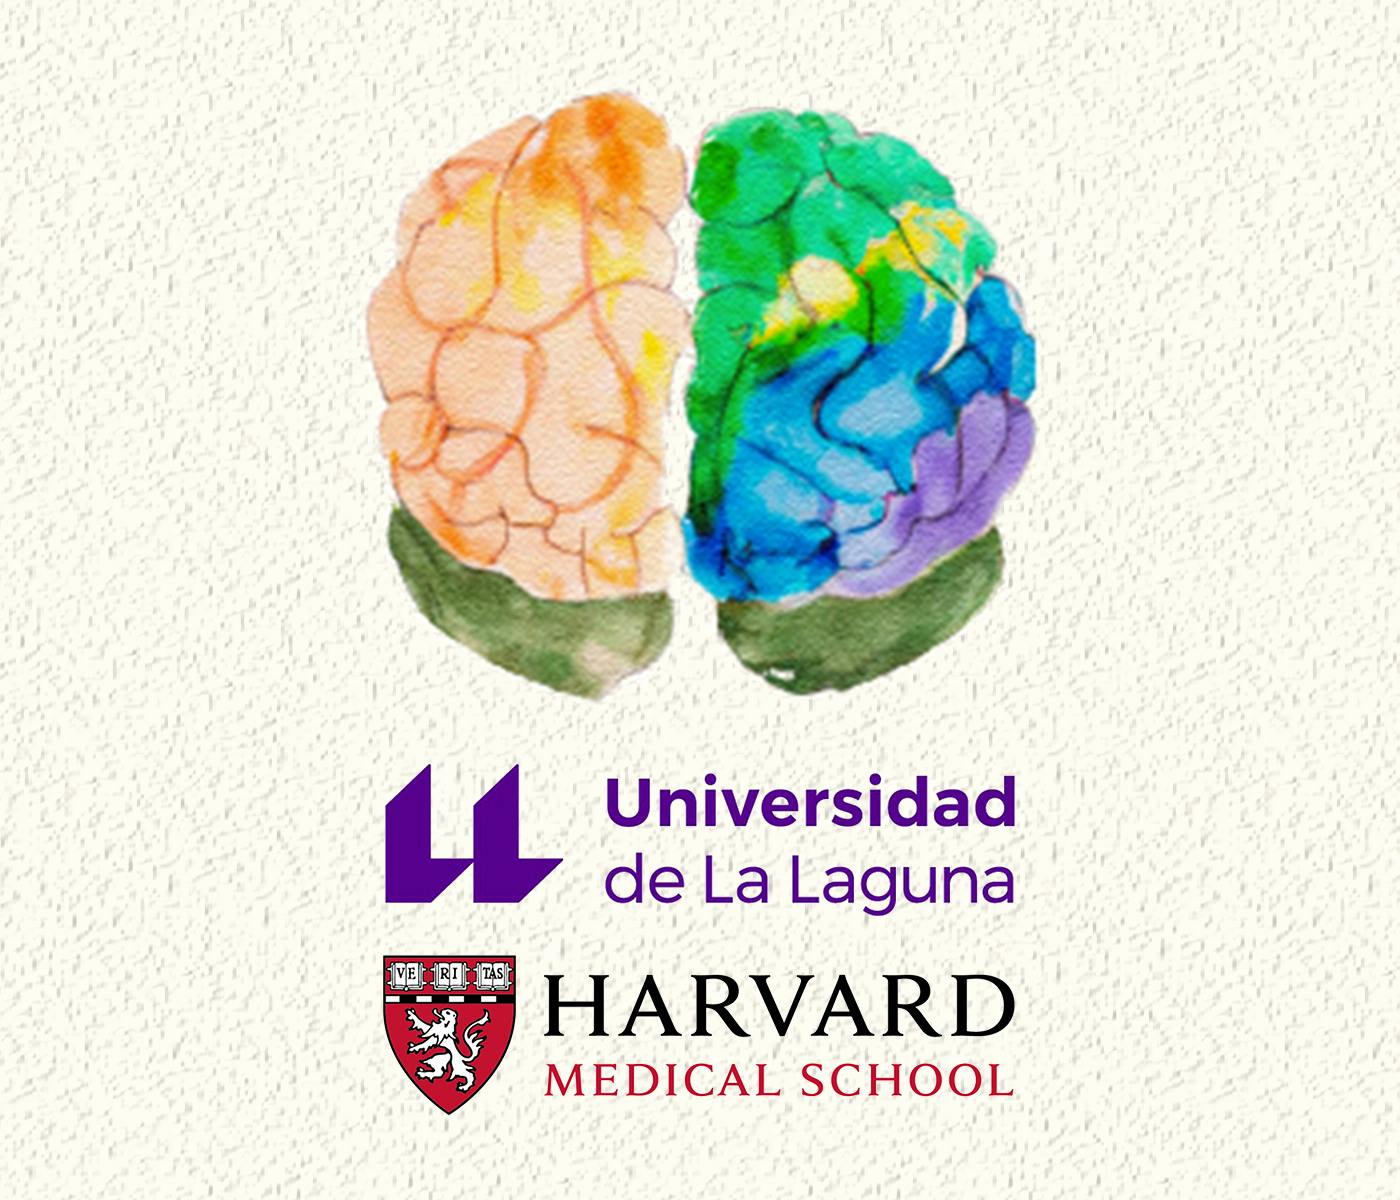 Artistic illustration of a colorful brain underlying which are positioned the logo of Universidad de La Lagura and the logo of Harvard Medical School.